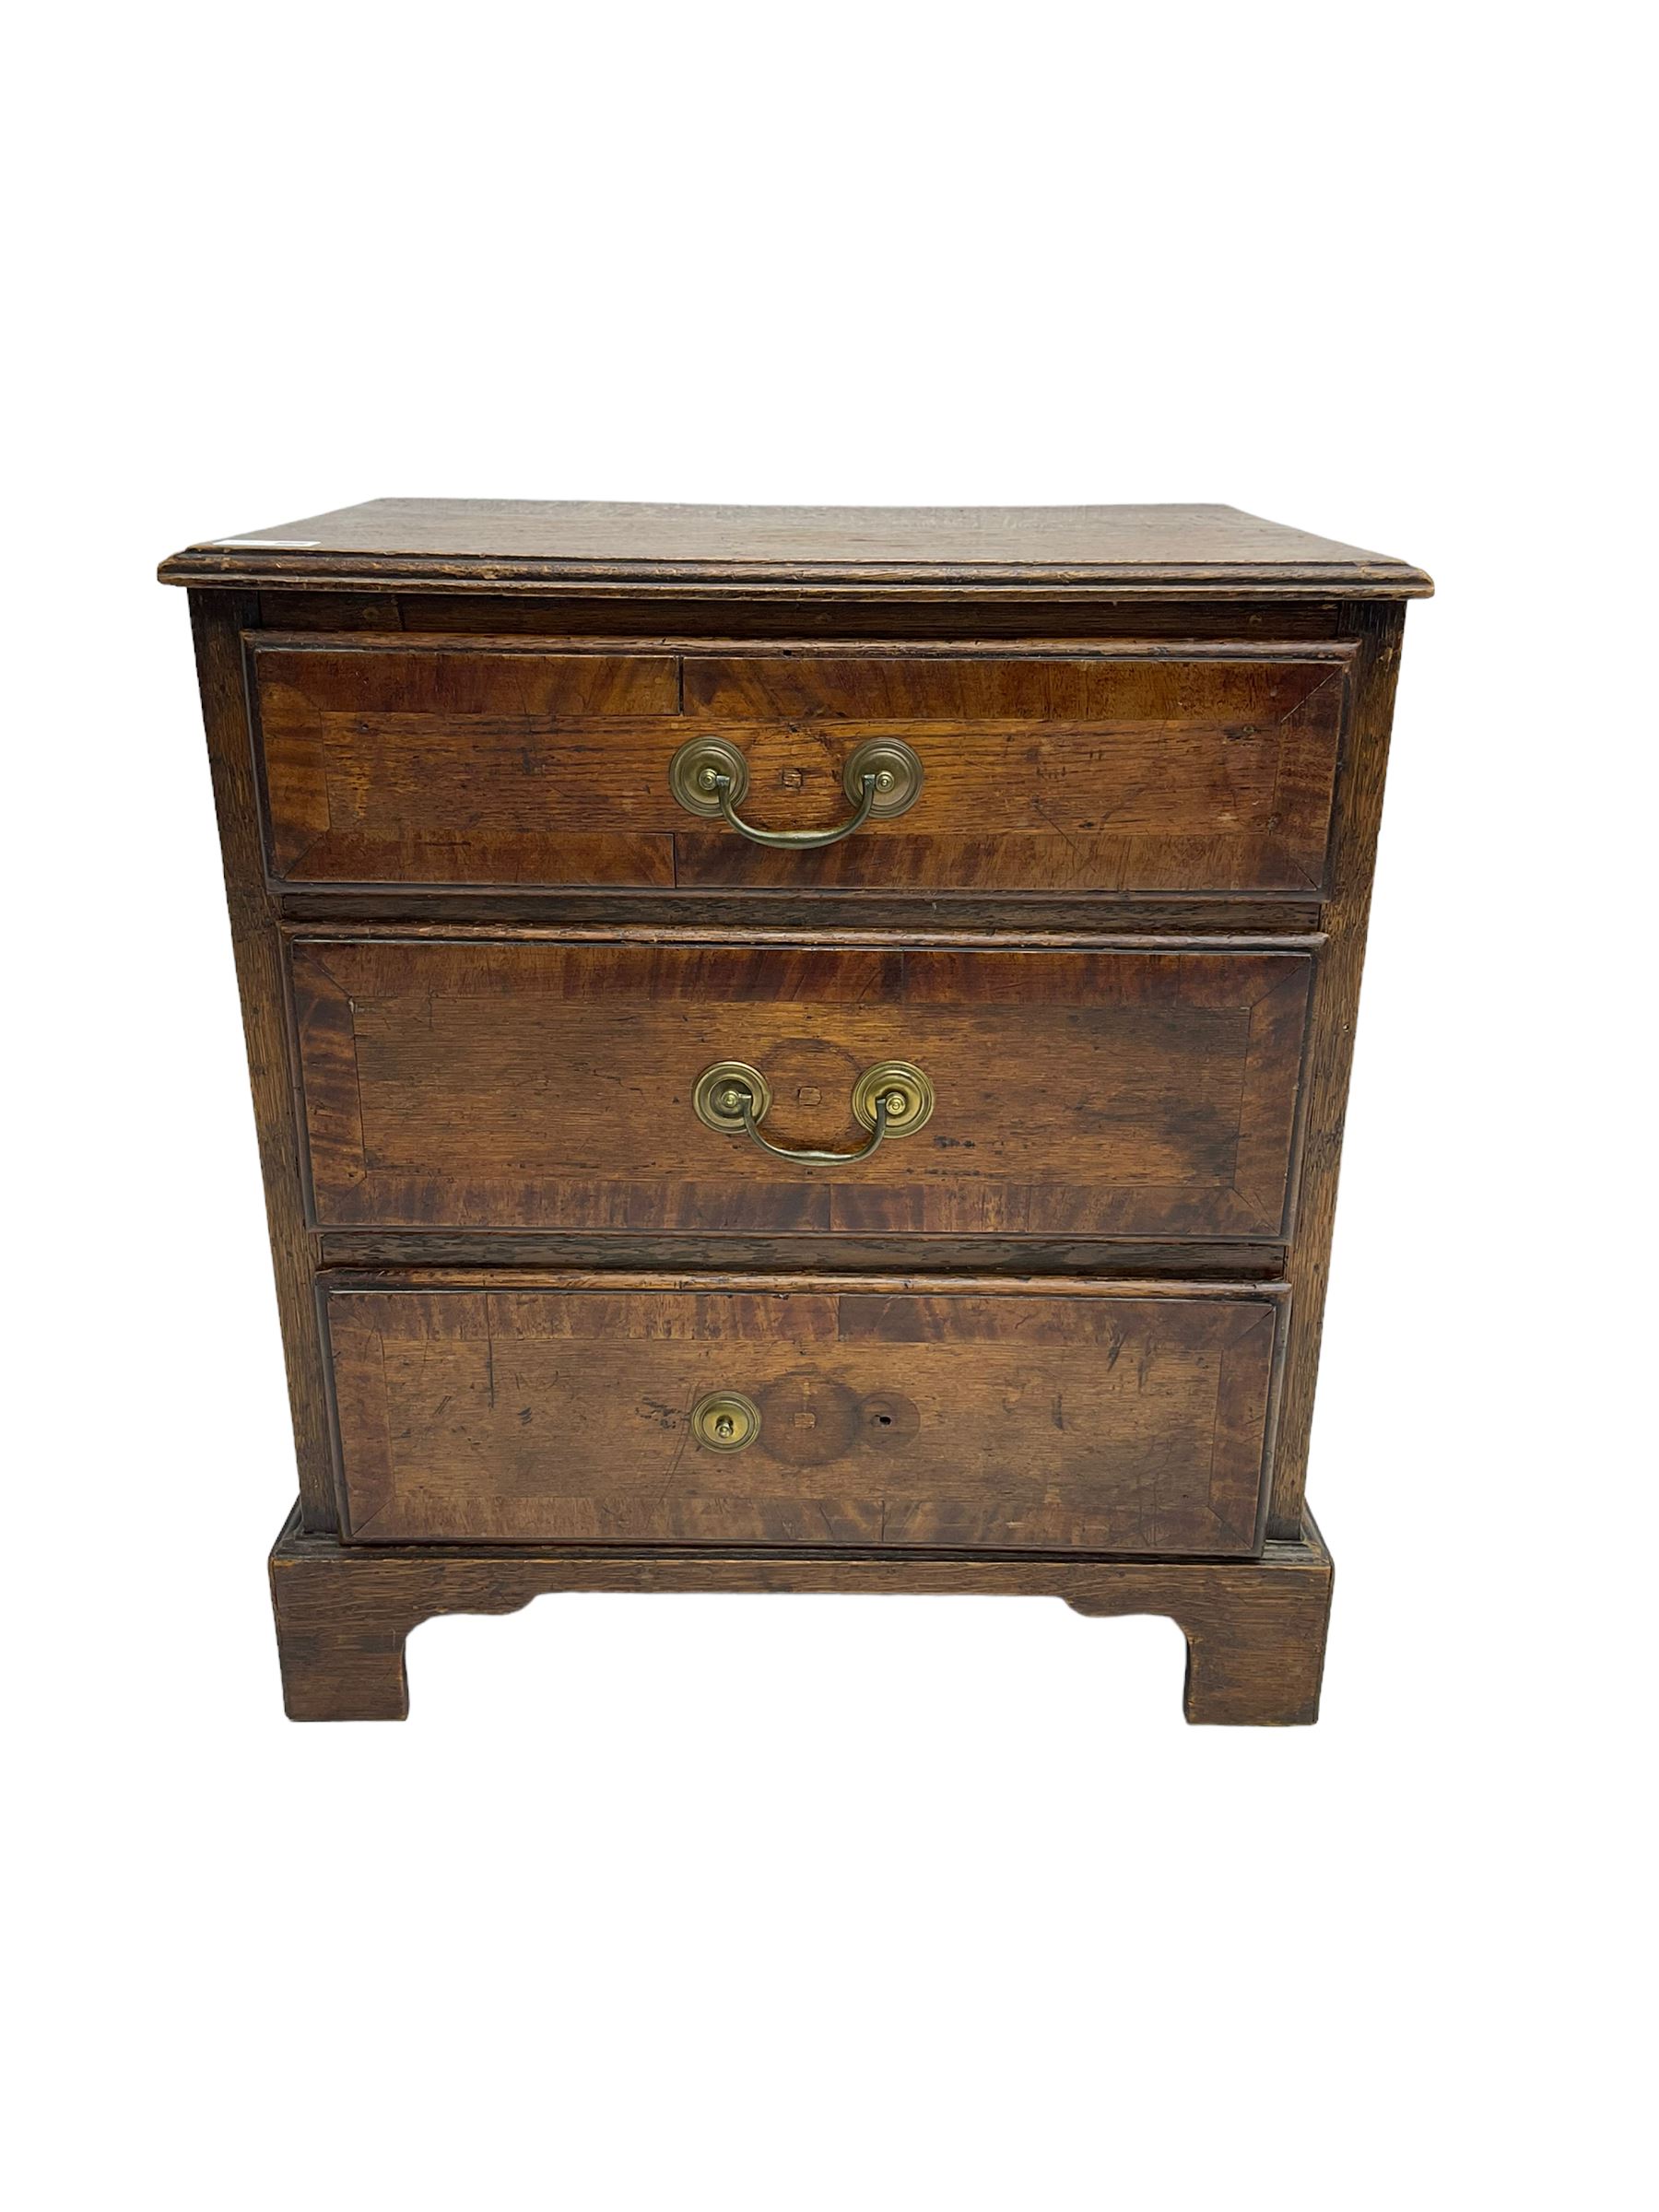 Small 19th century and later oak chest - Image 9 of 9